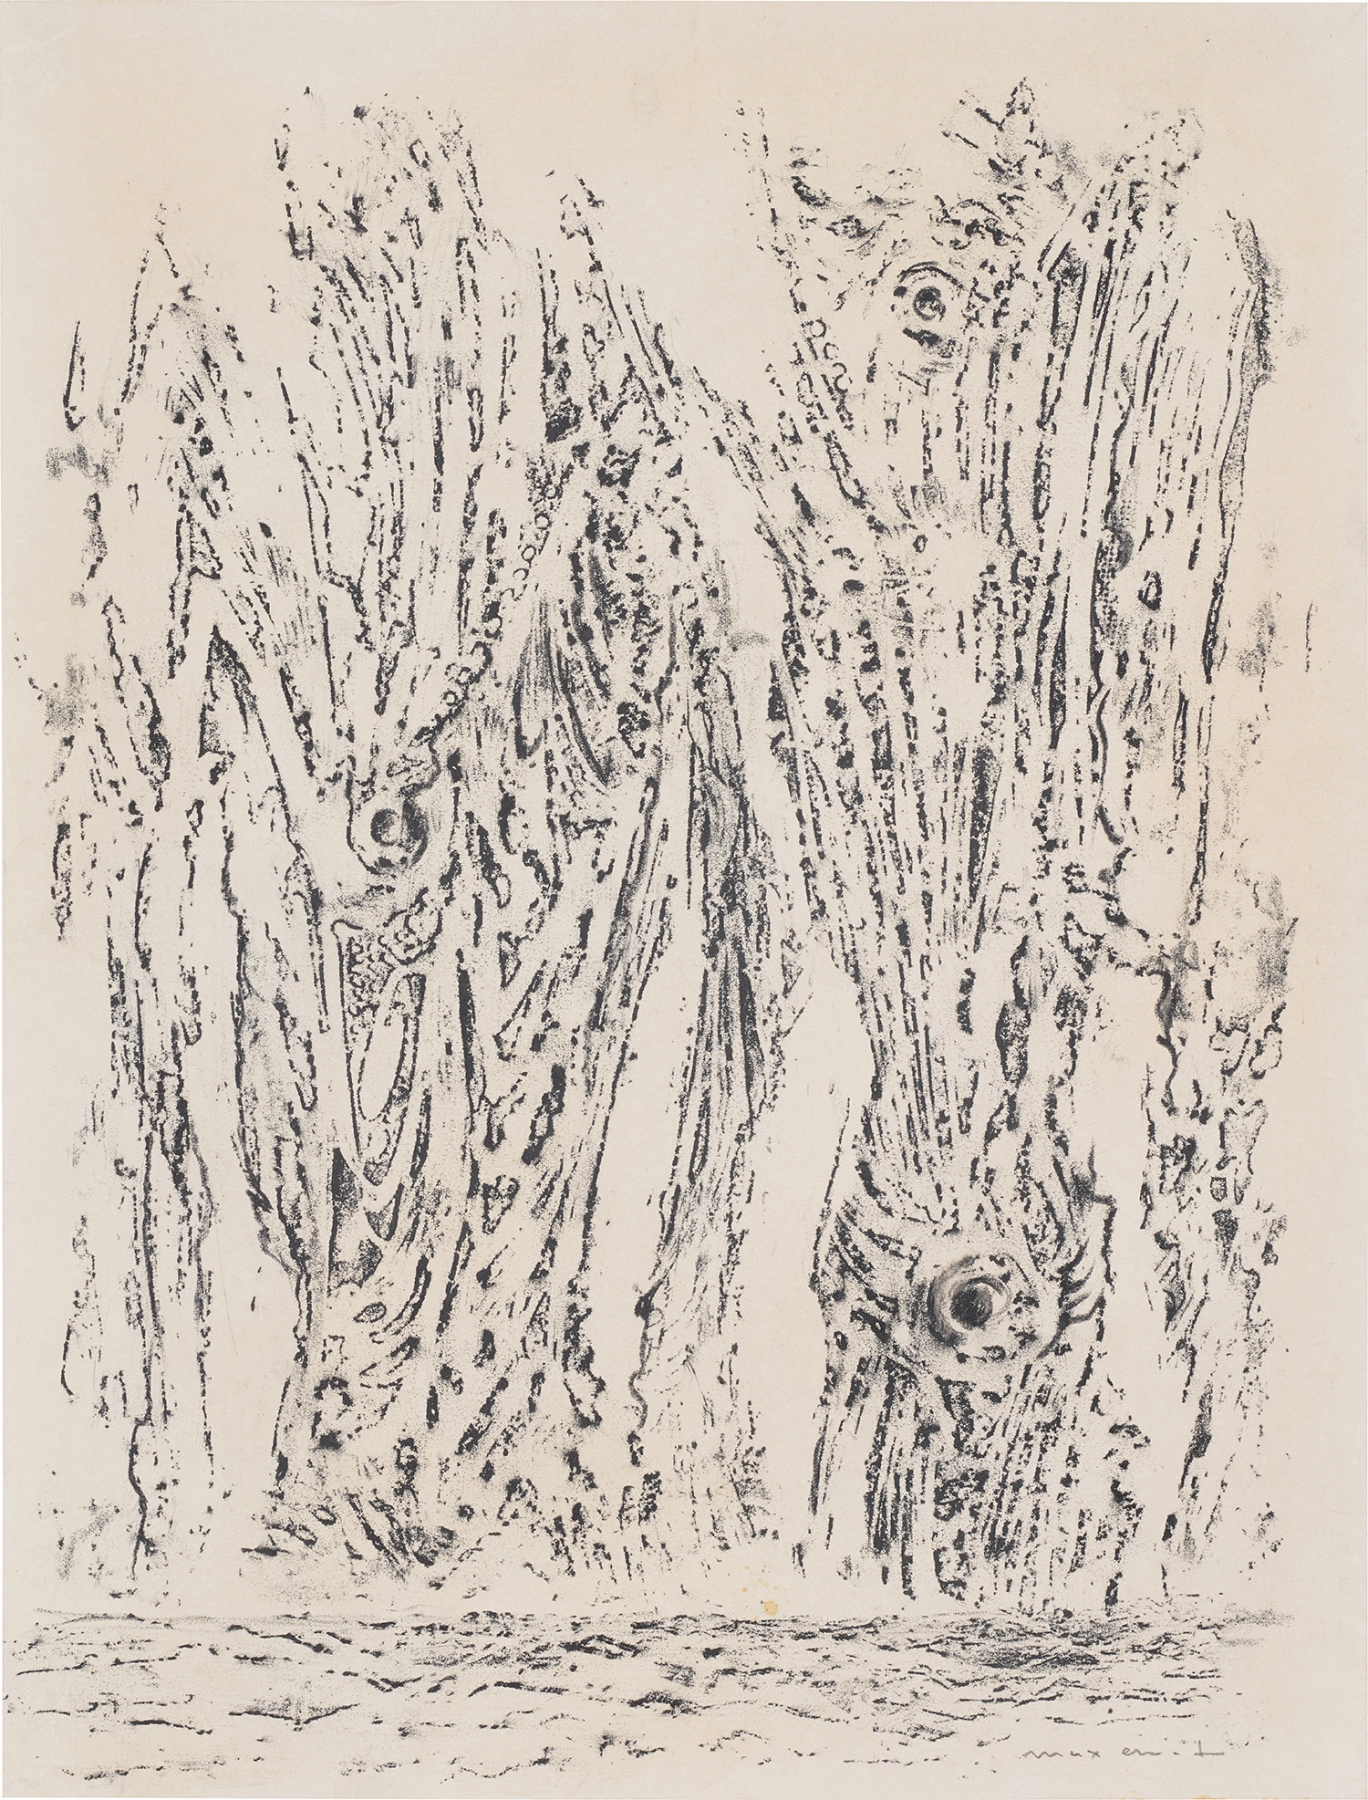 Max Ernst

For&ecirc;t, 1964

frottage on paper

paper: 16 1/4 x 12 3/8 inches

frame: 24 5/8 x 21 5/8 x 1 9/16 inches